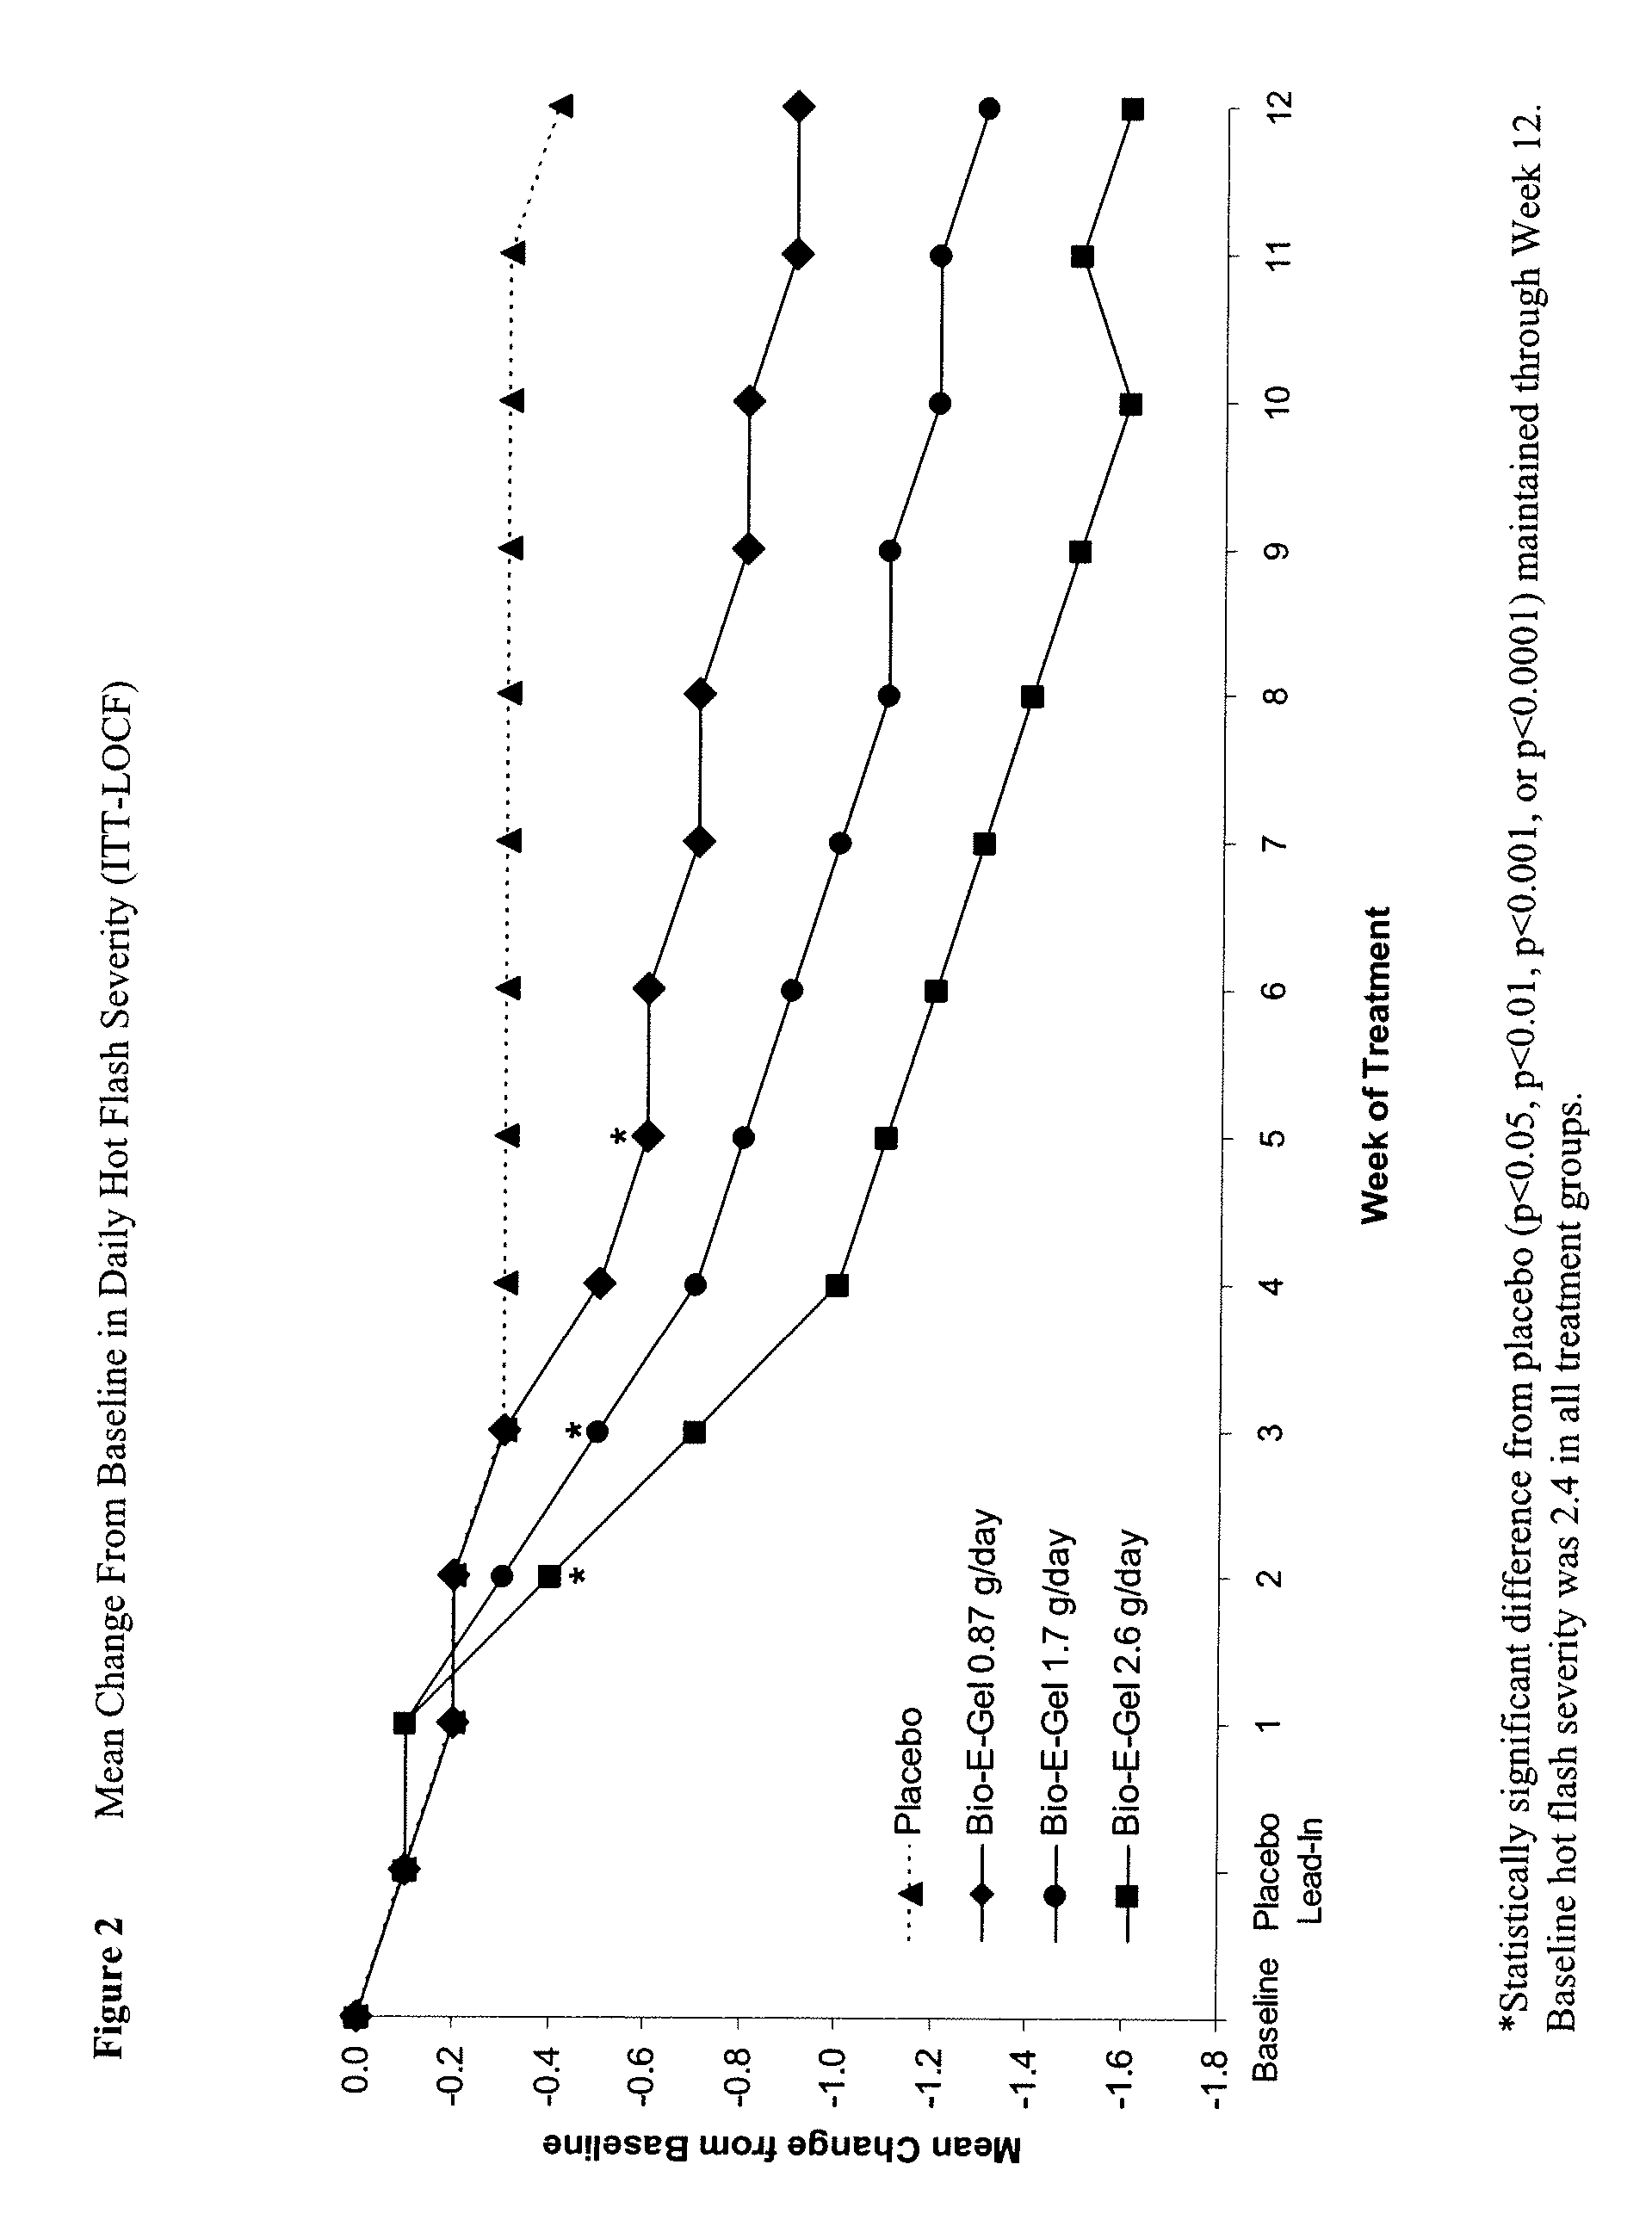 Methods of treating hot flashes with formulations for transdermal or transmucosal application